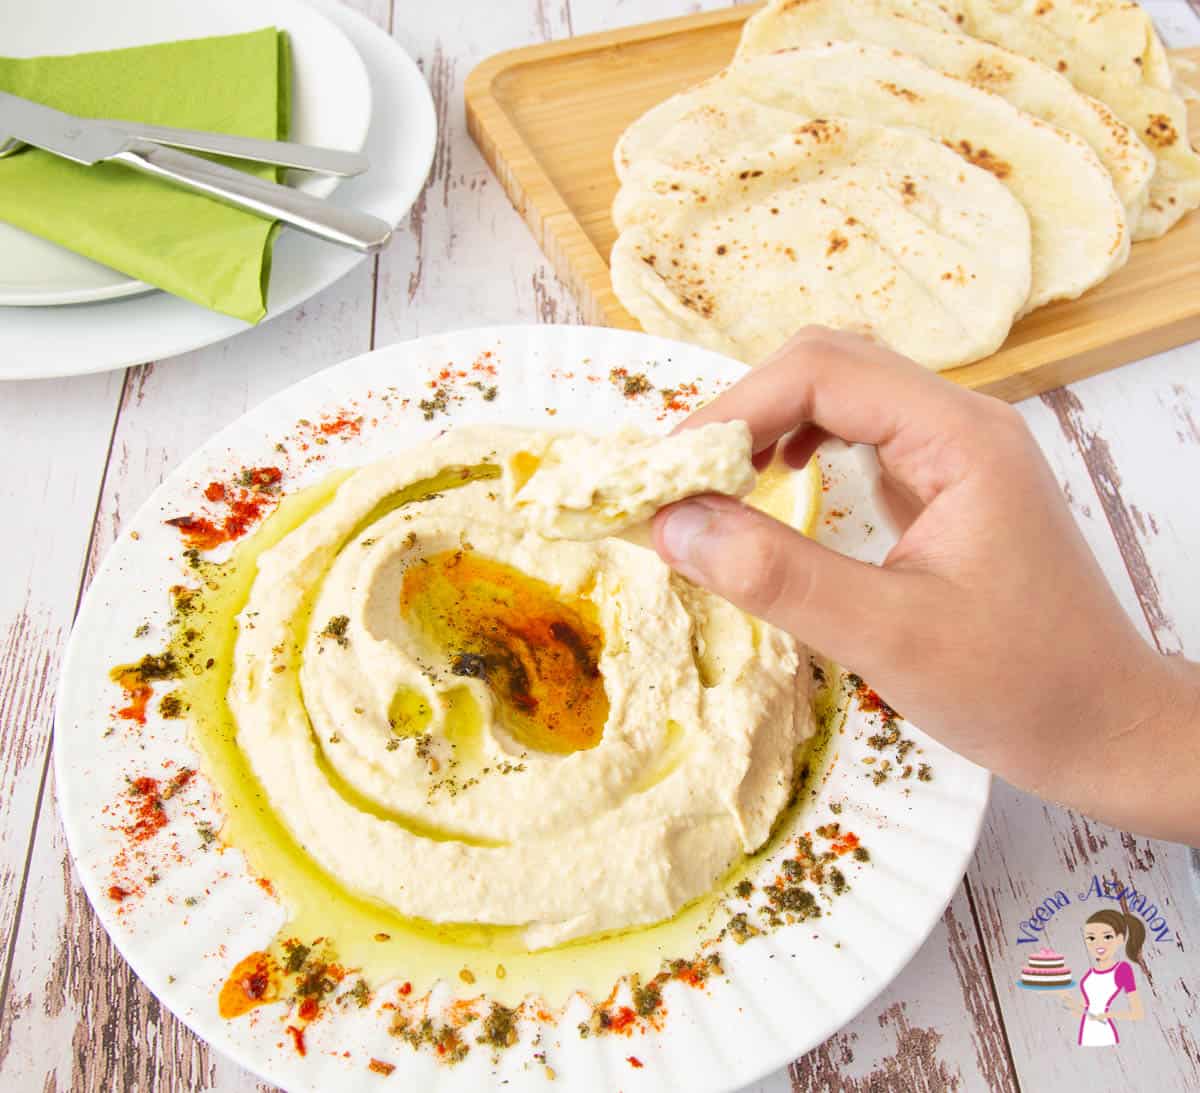 A person eating from a plate of hummus on a table.